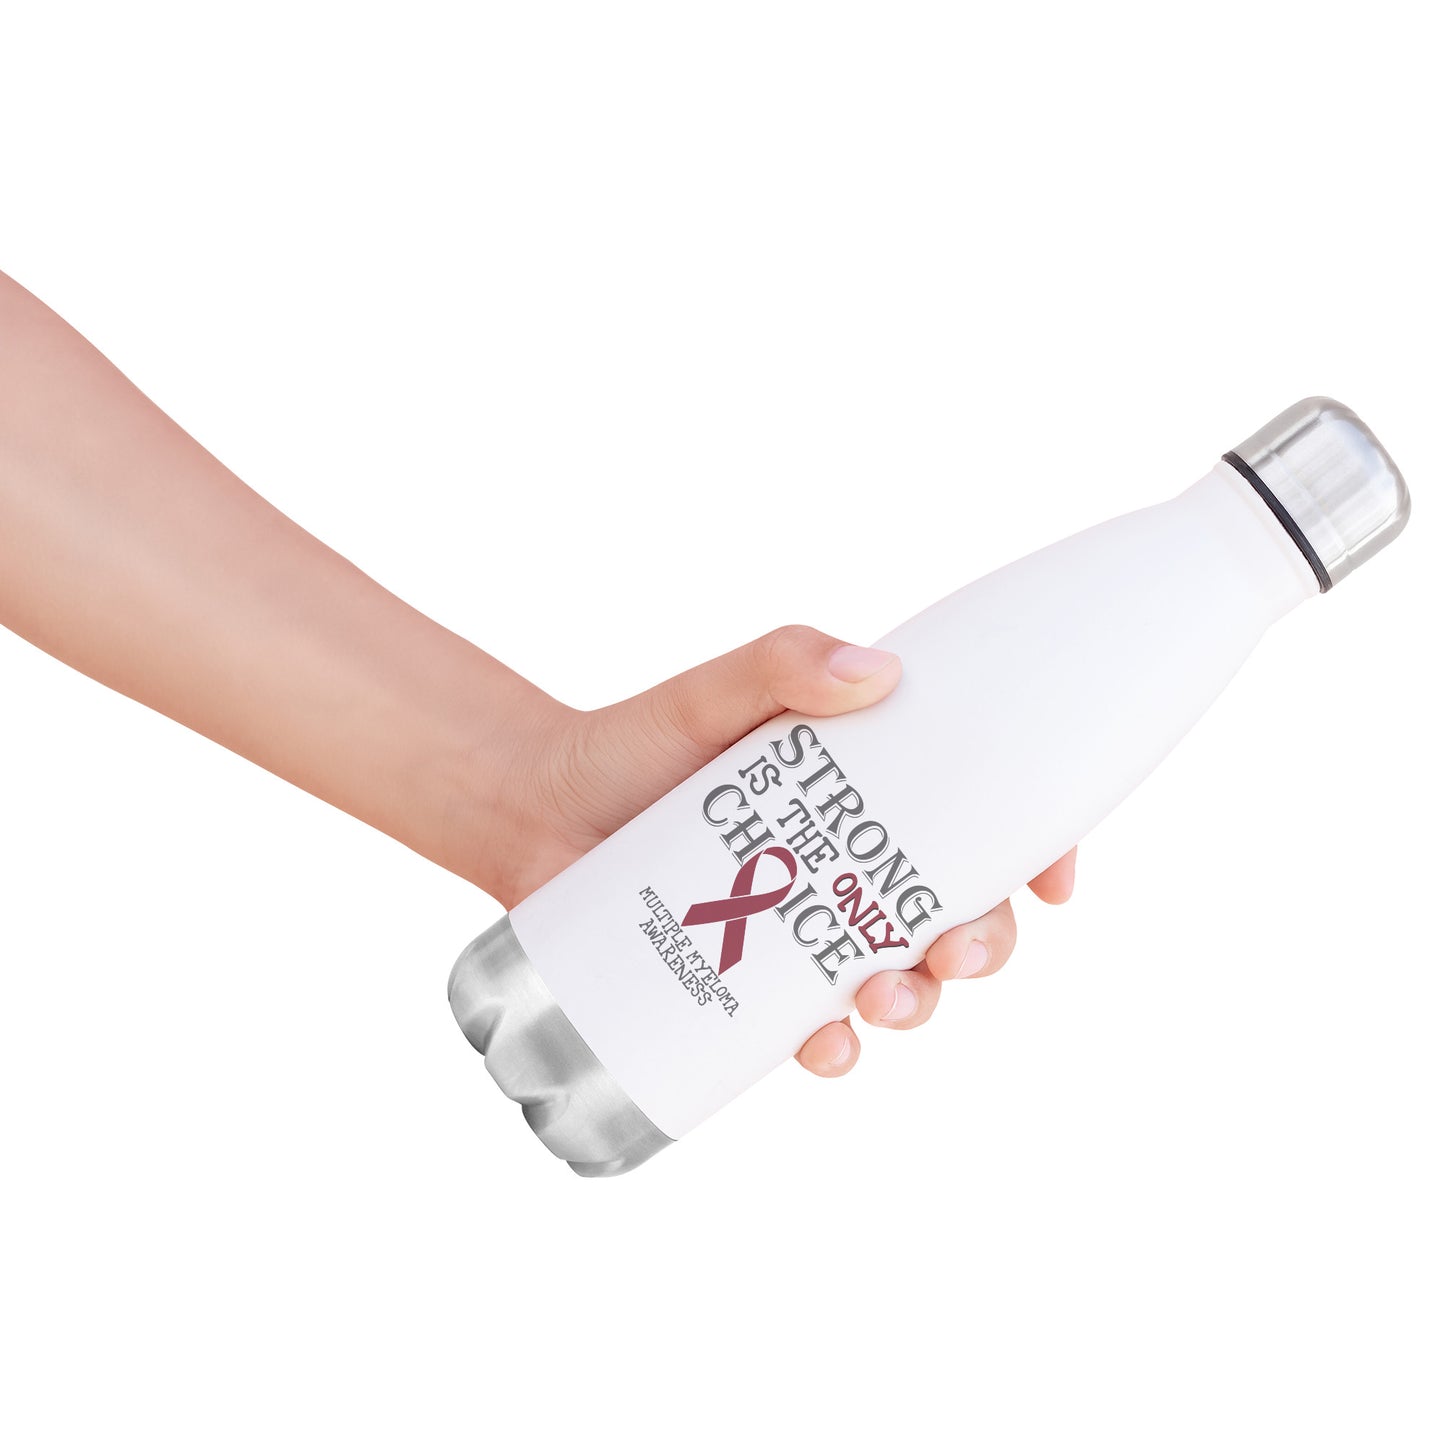 Strong is the Only Choice -Multiple Myeloma Awareness 200z Insulated Water Bottle